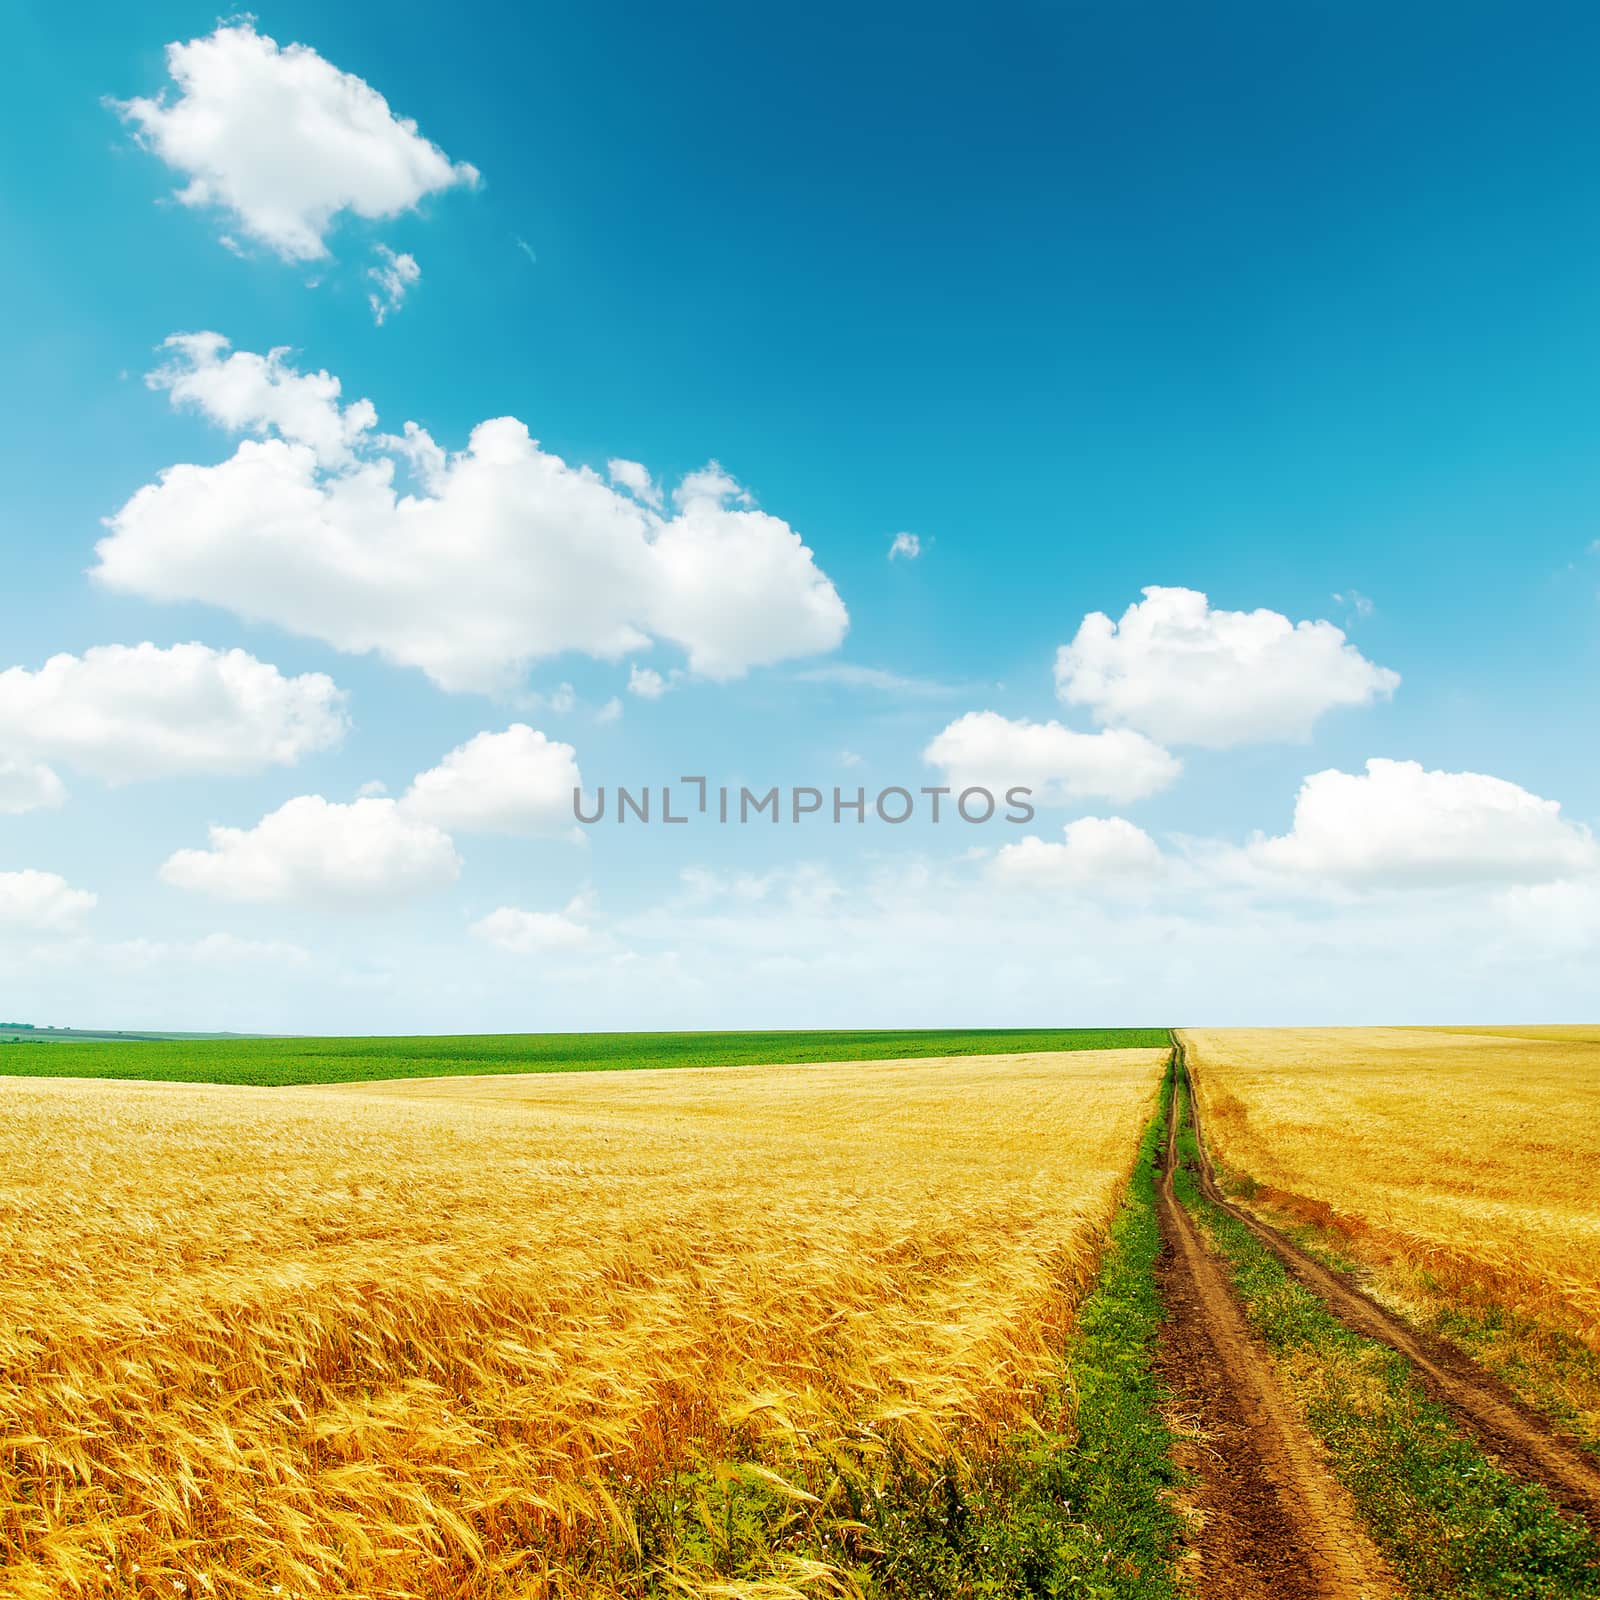 road in golden field with harvest under blue sky with clouds